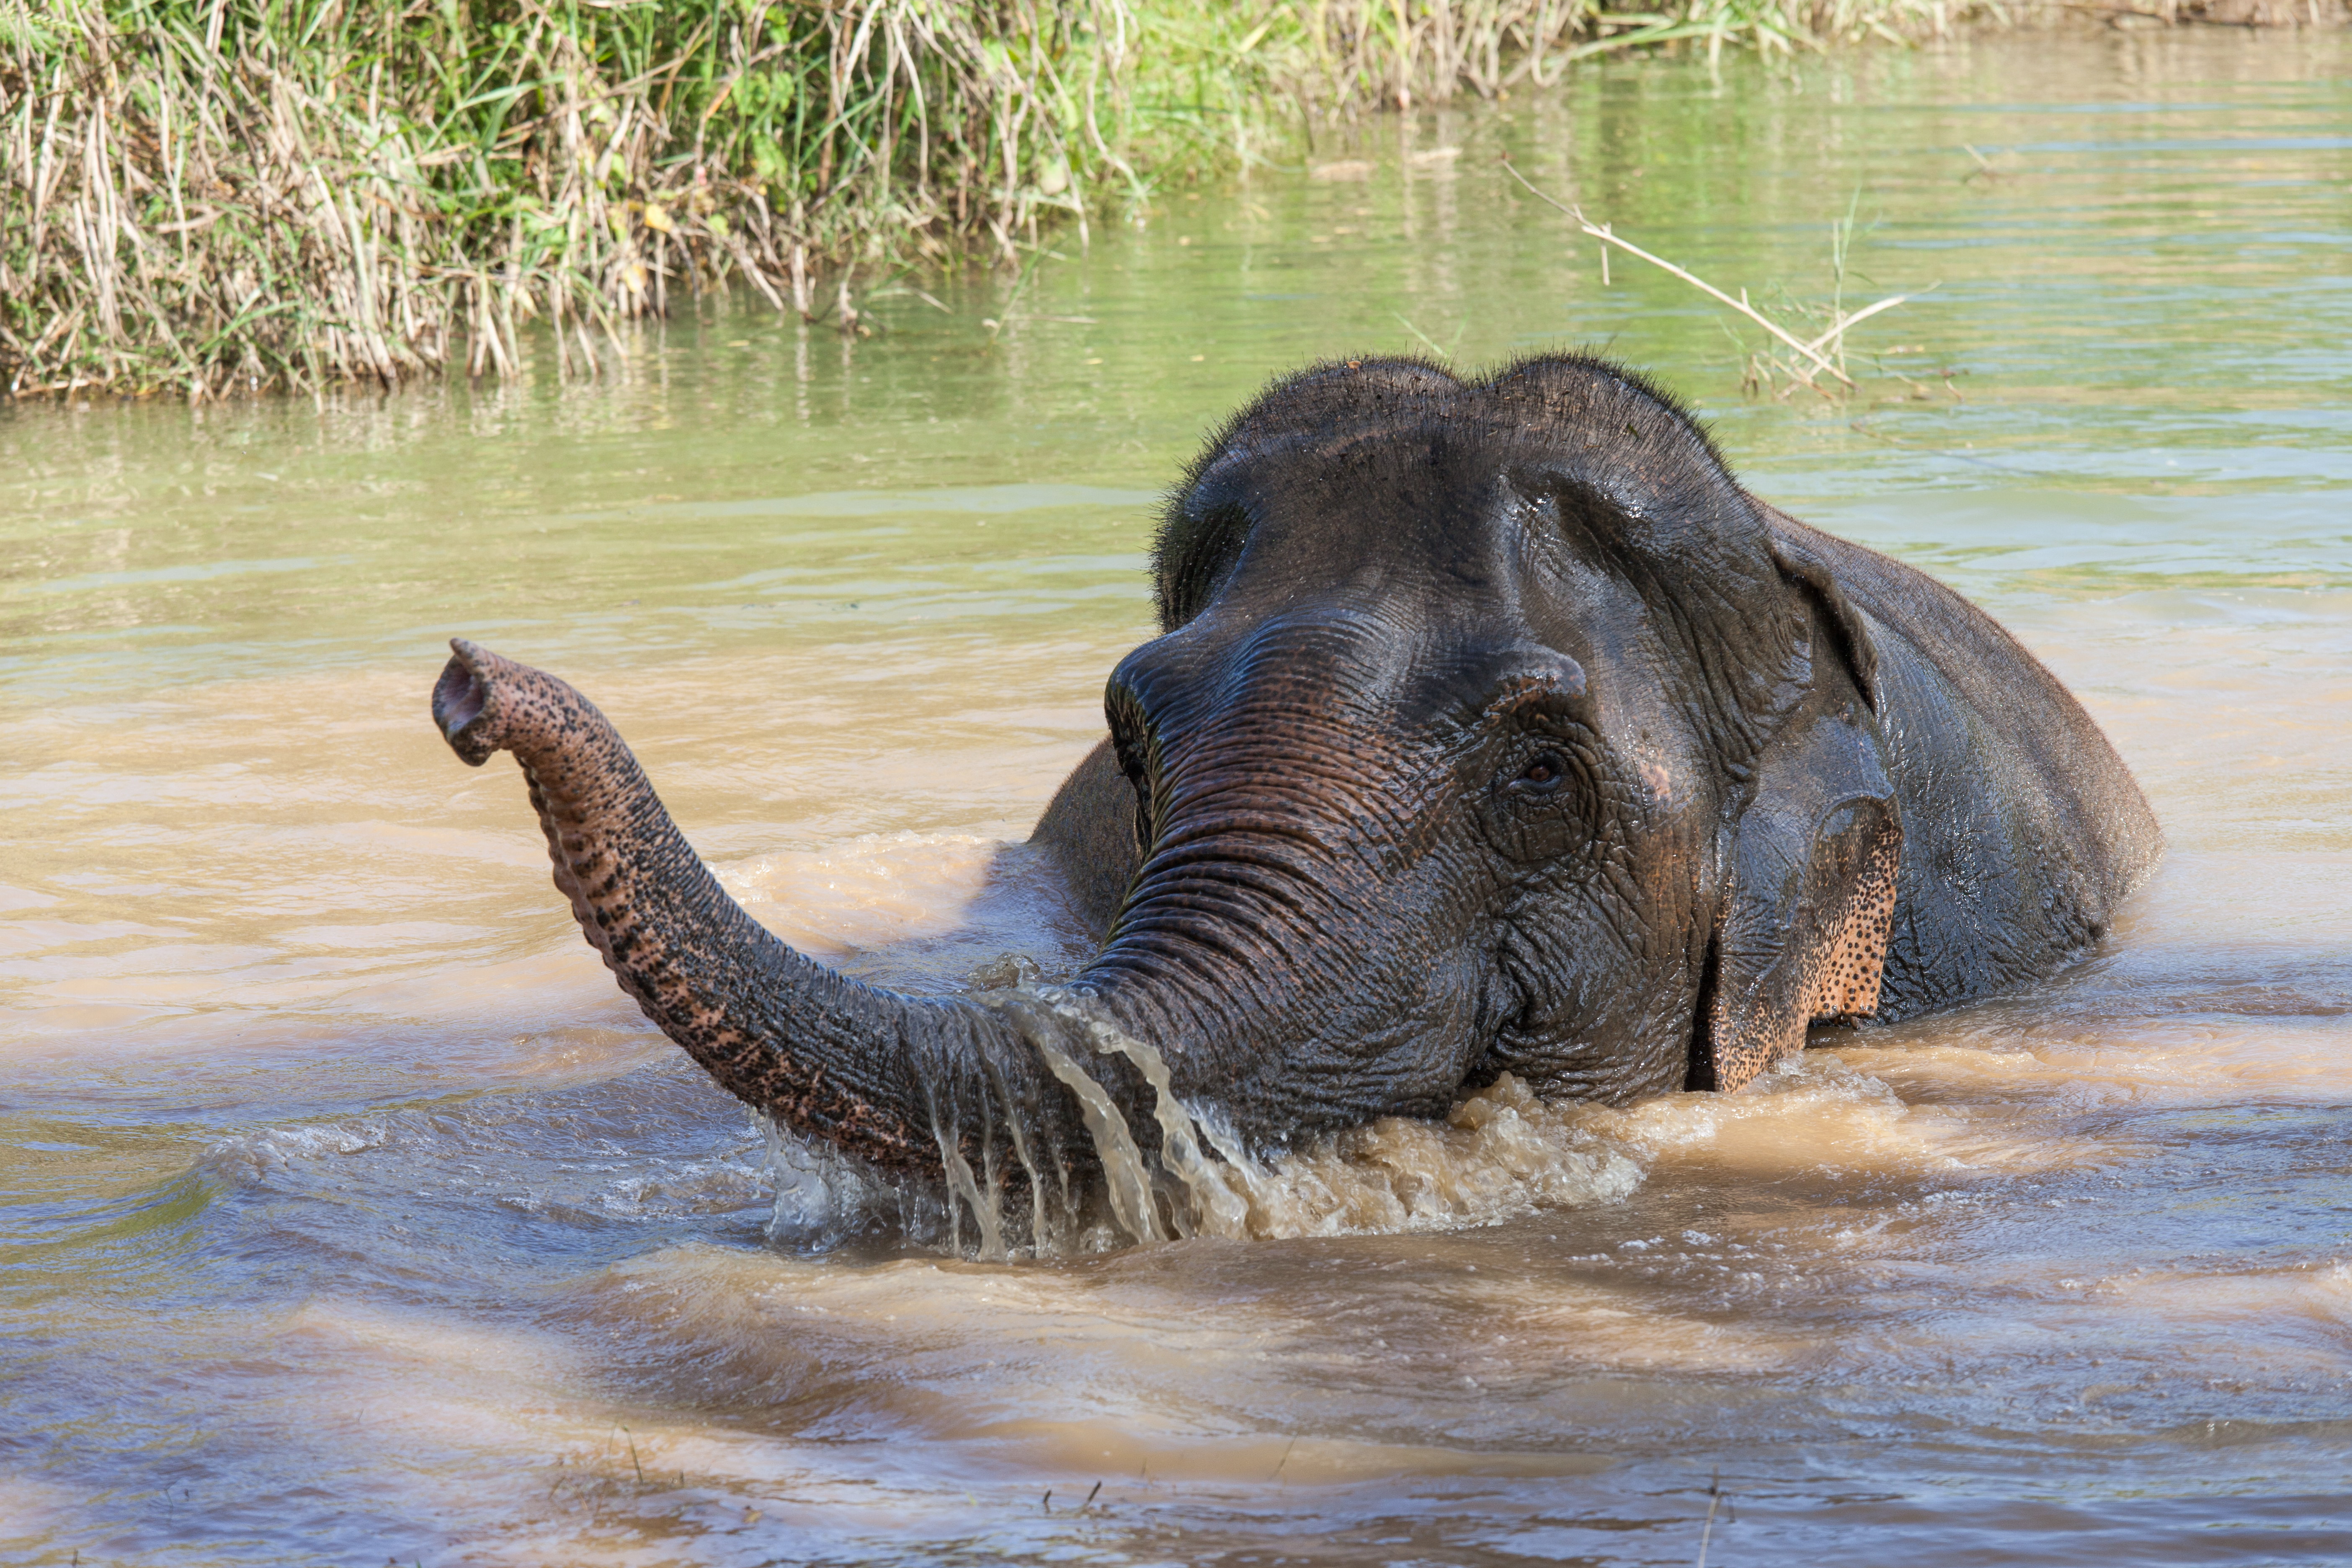 Lotus the elephant cools off in the river